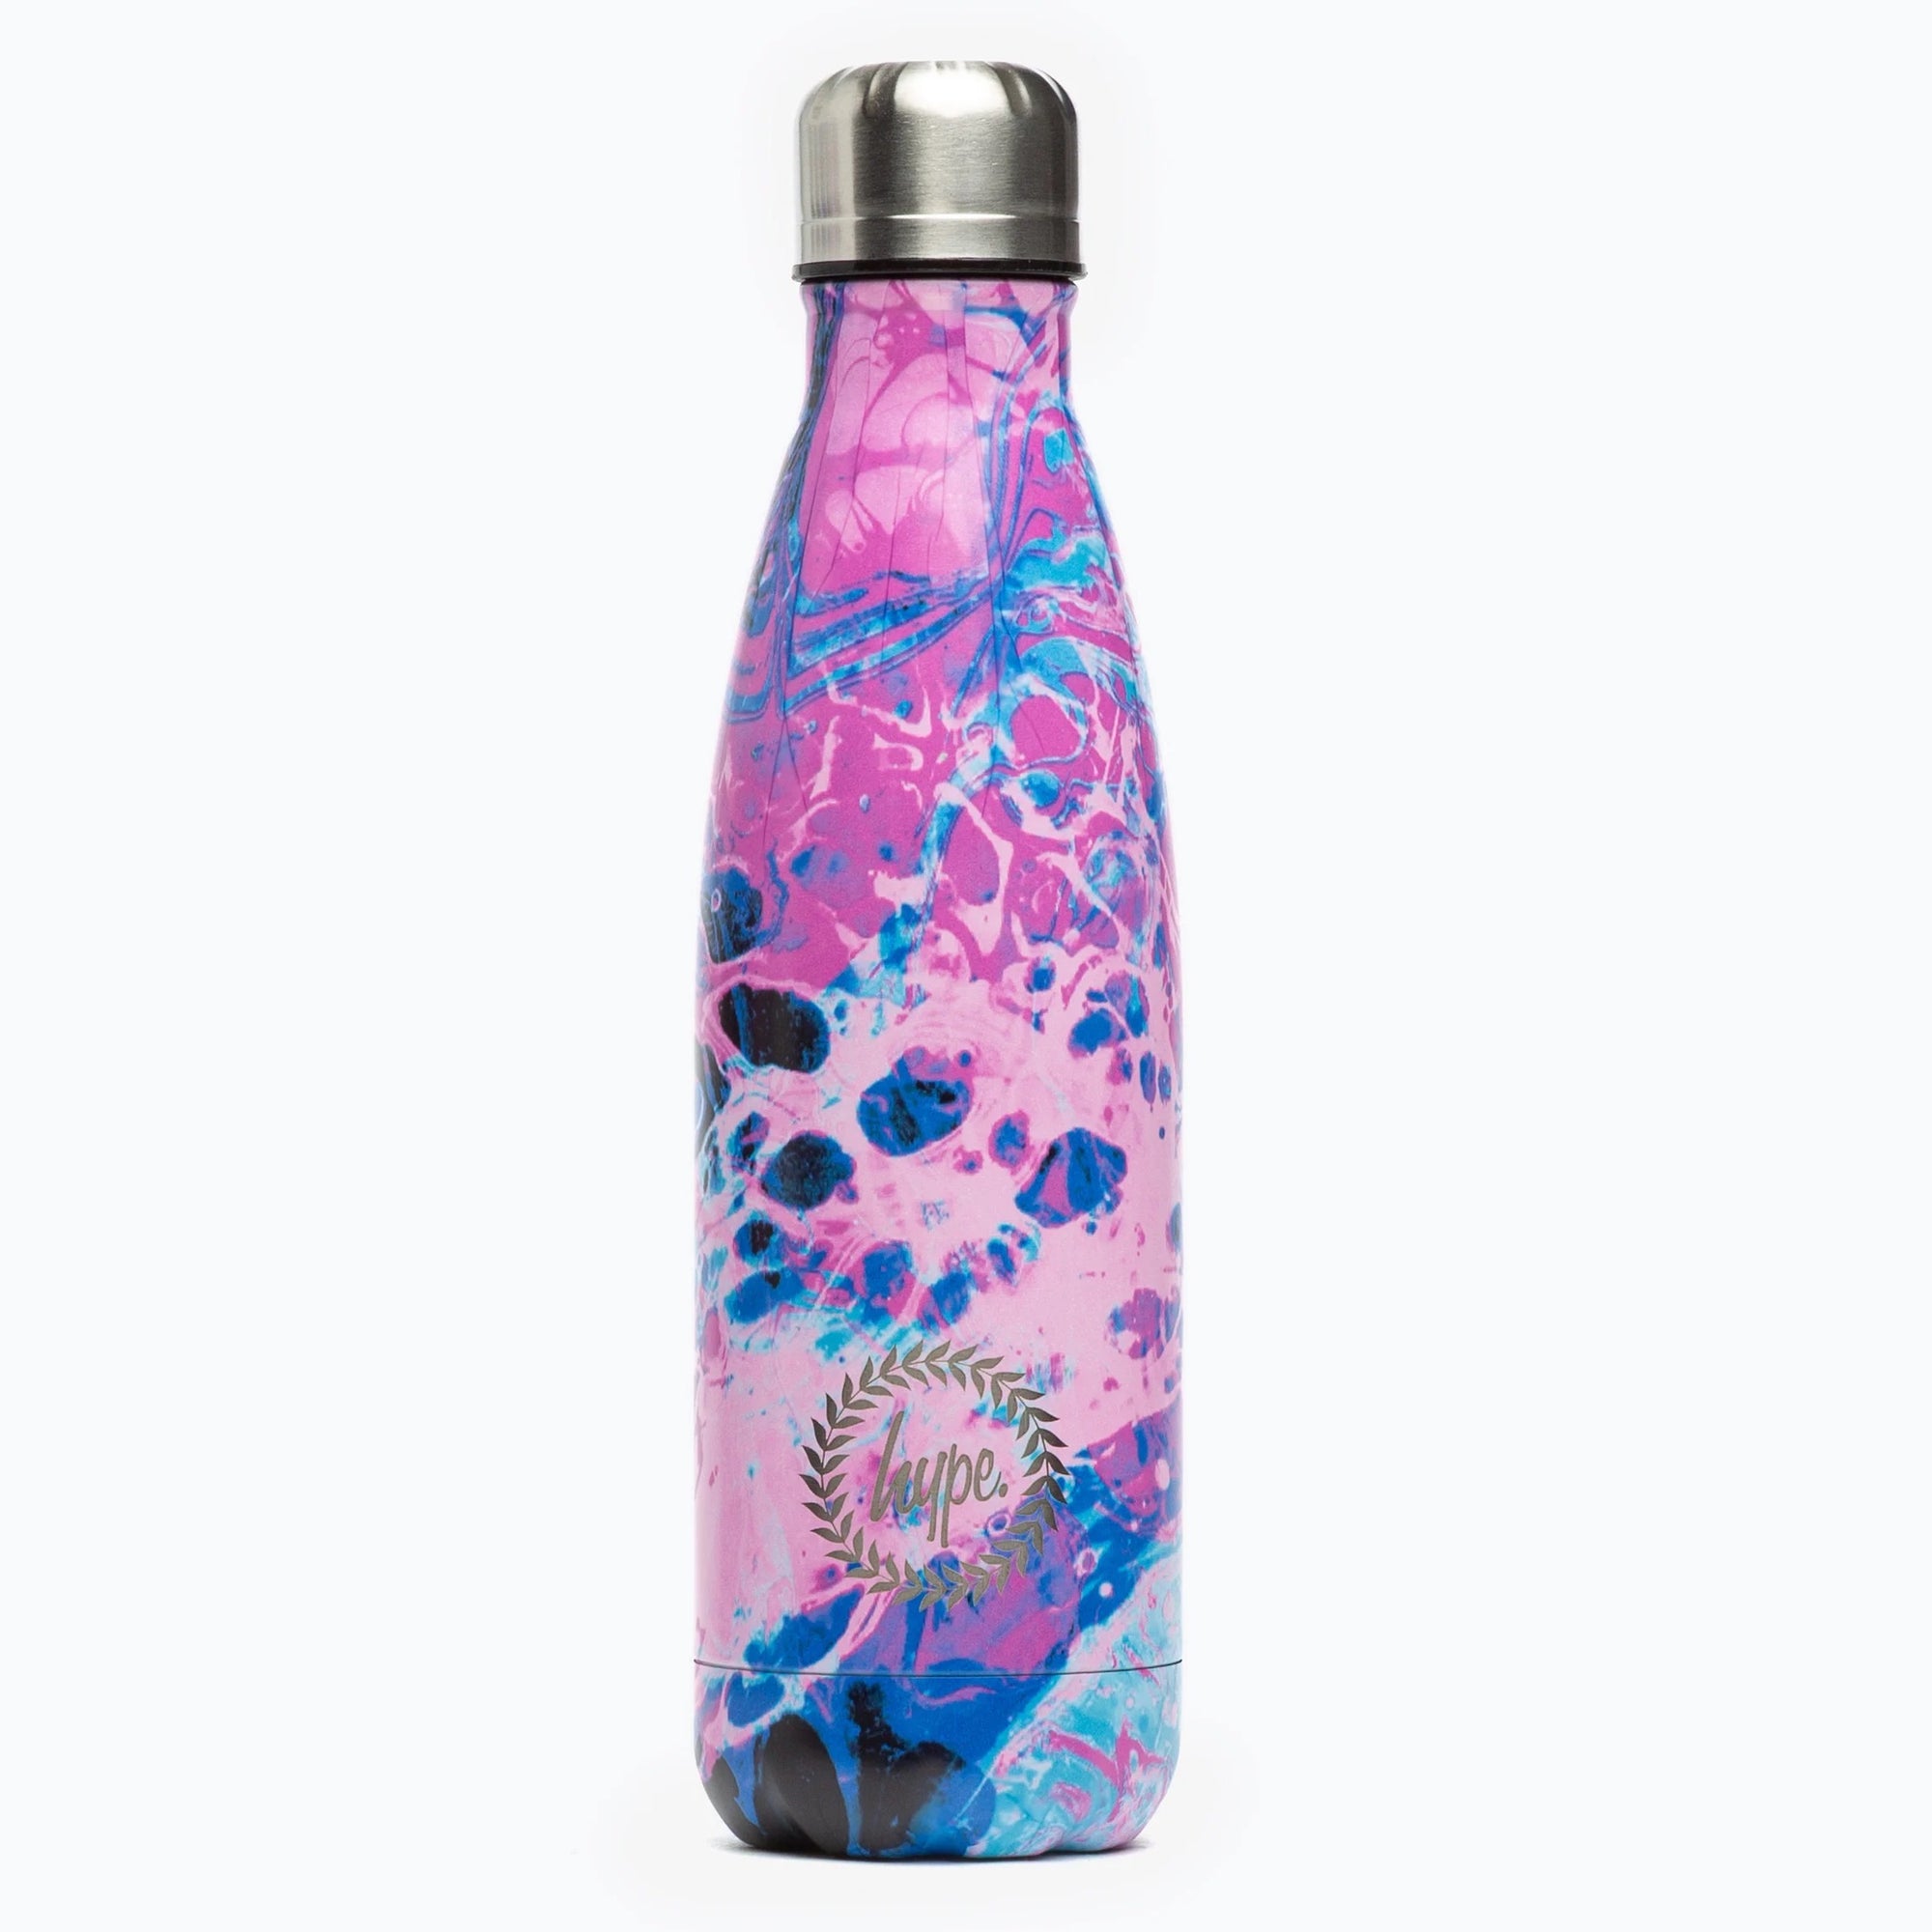 Hype Mermaid Marble Bottle Xucb-321 Accessories ONE SIZE / Multi